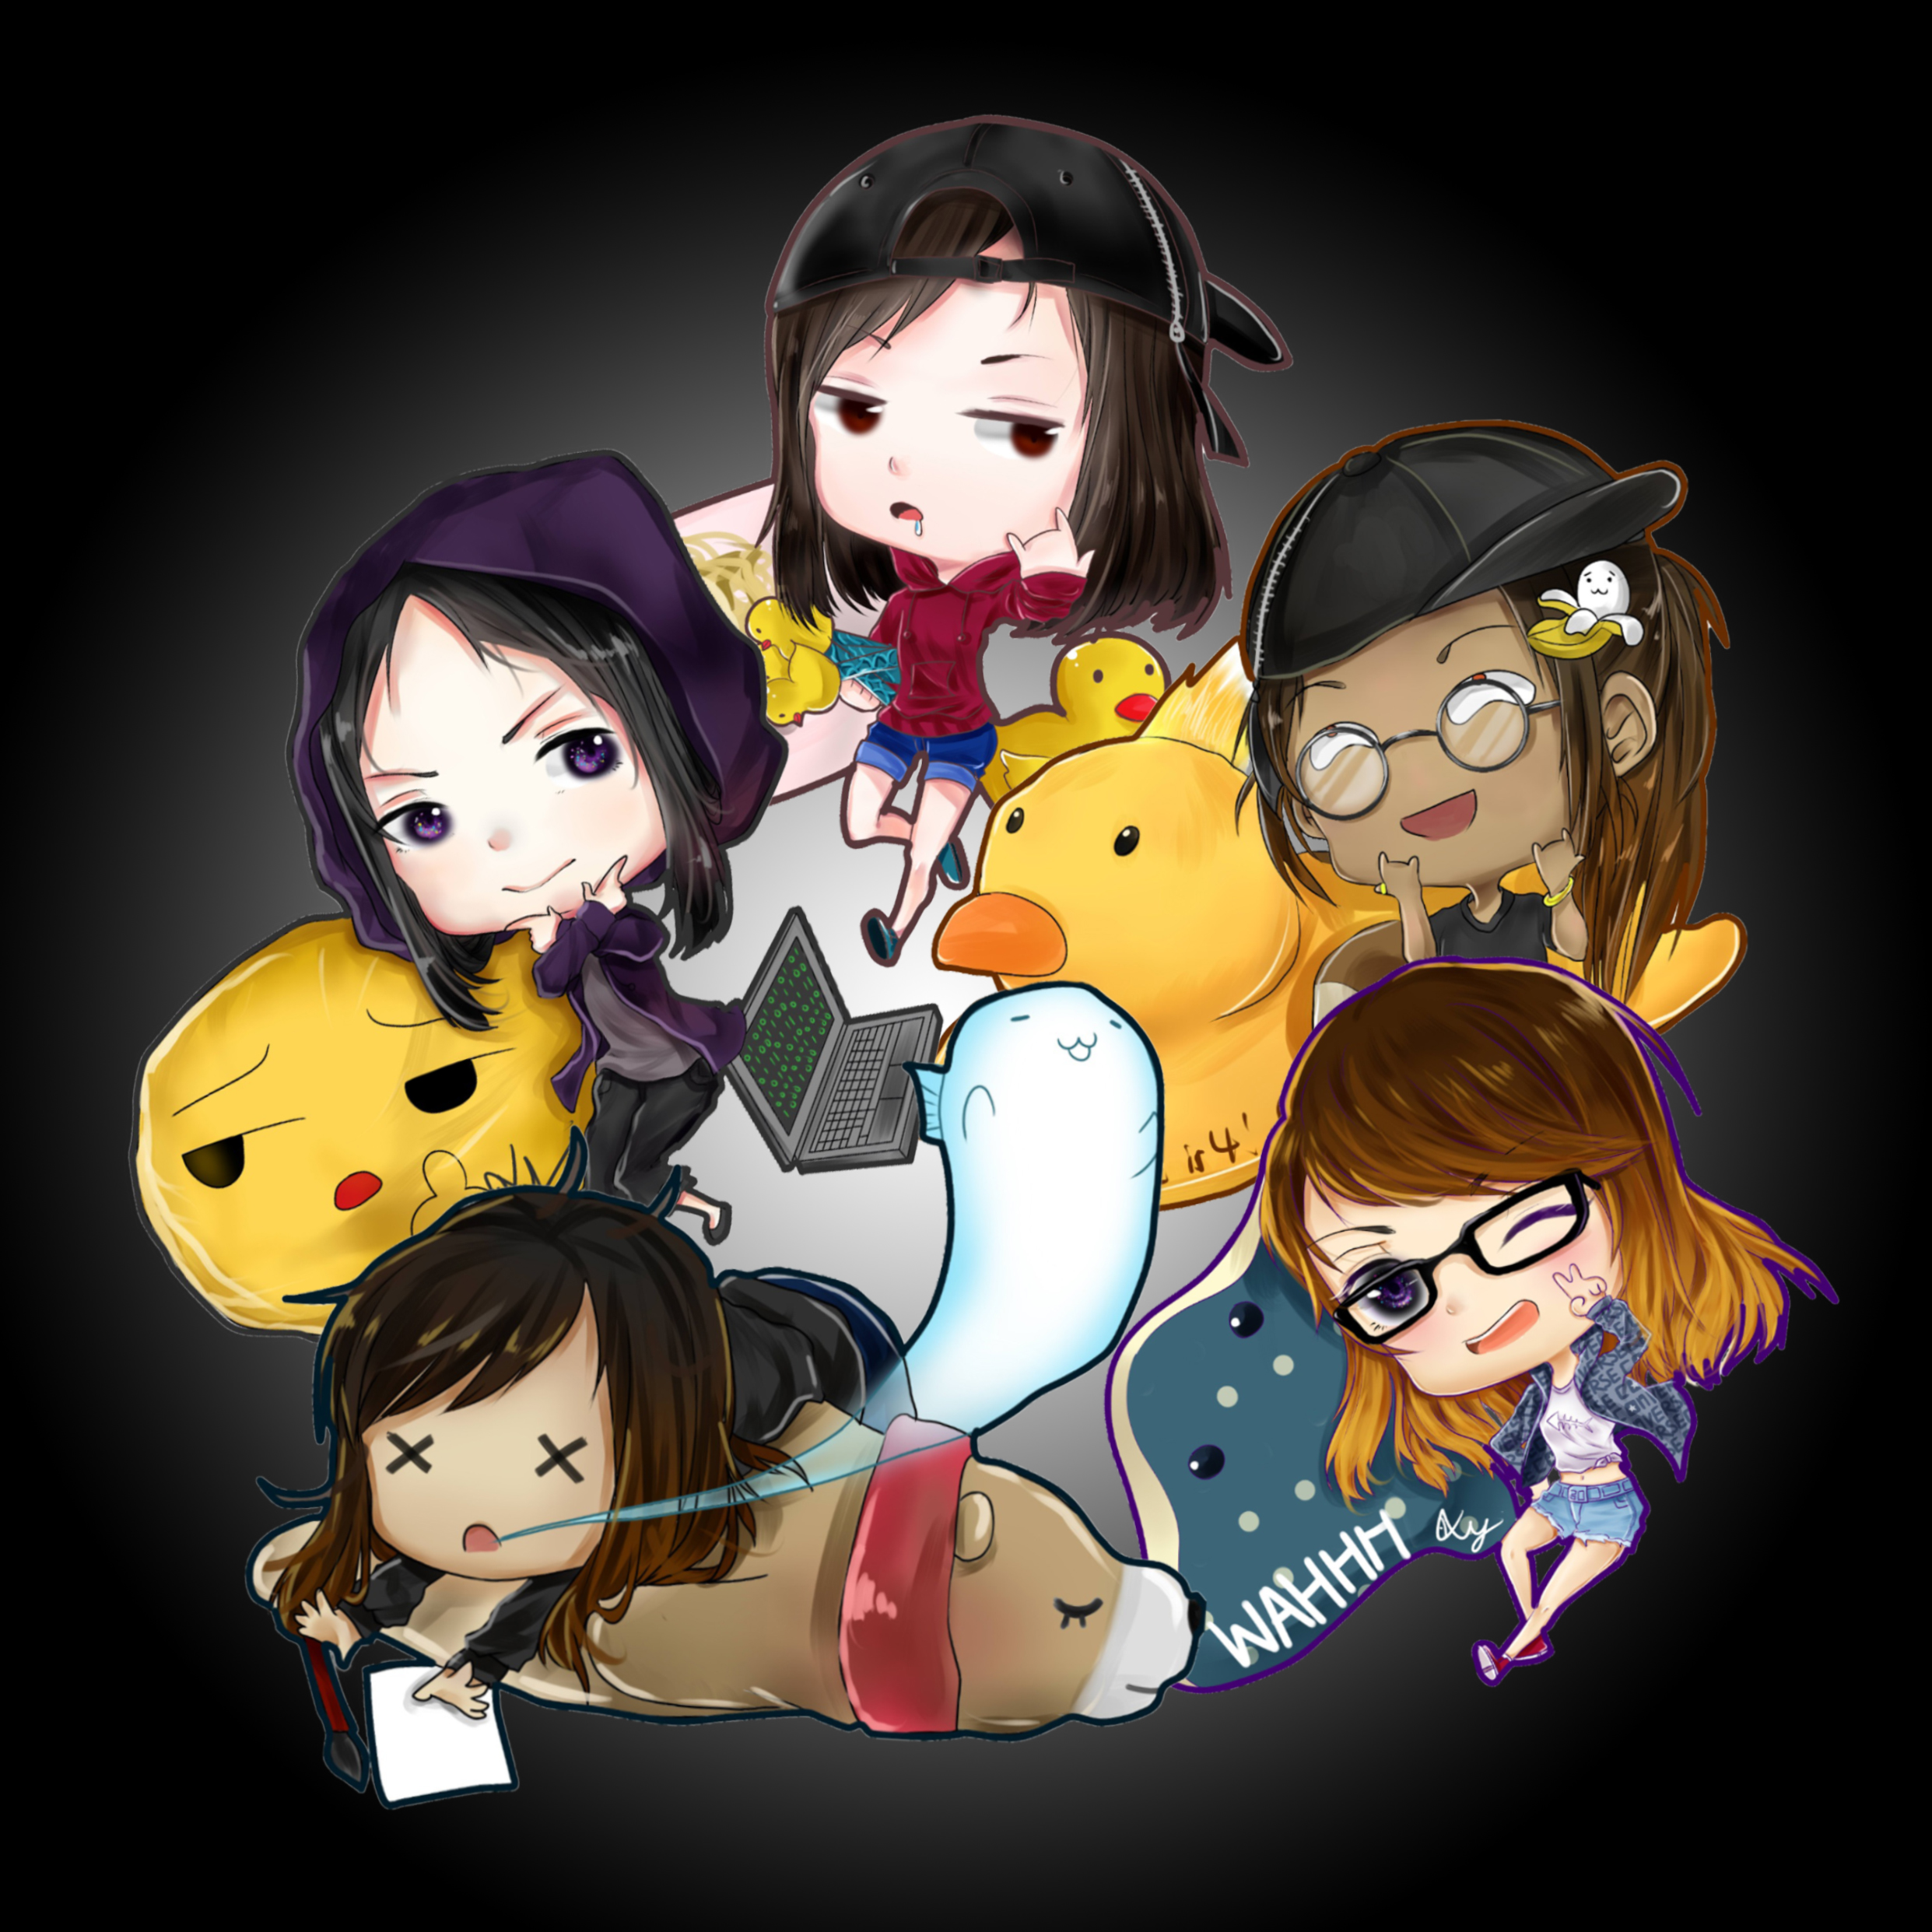 My friends and I drawn in a chibi style